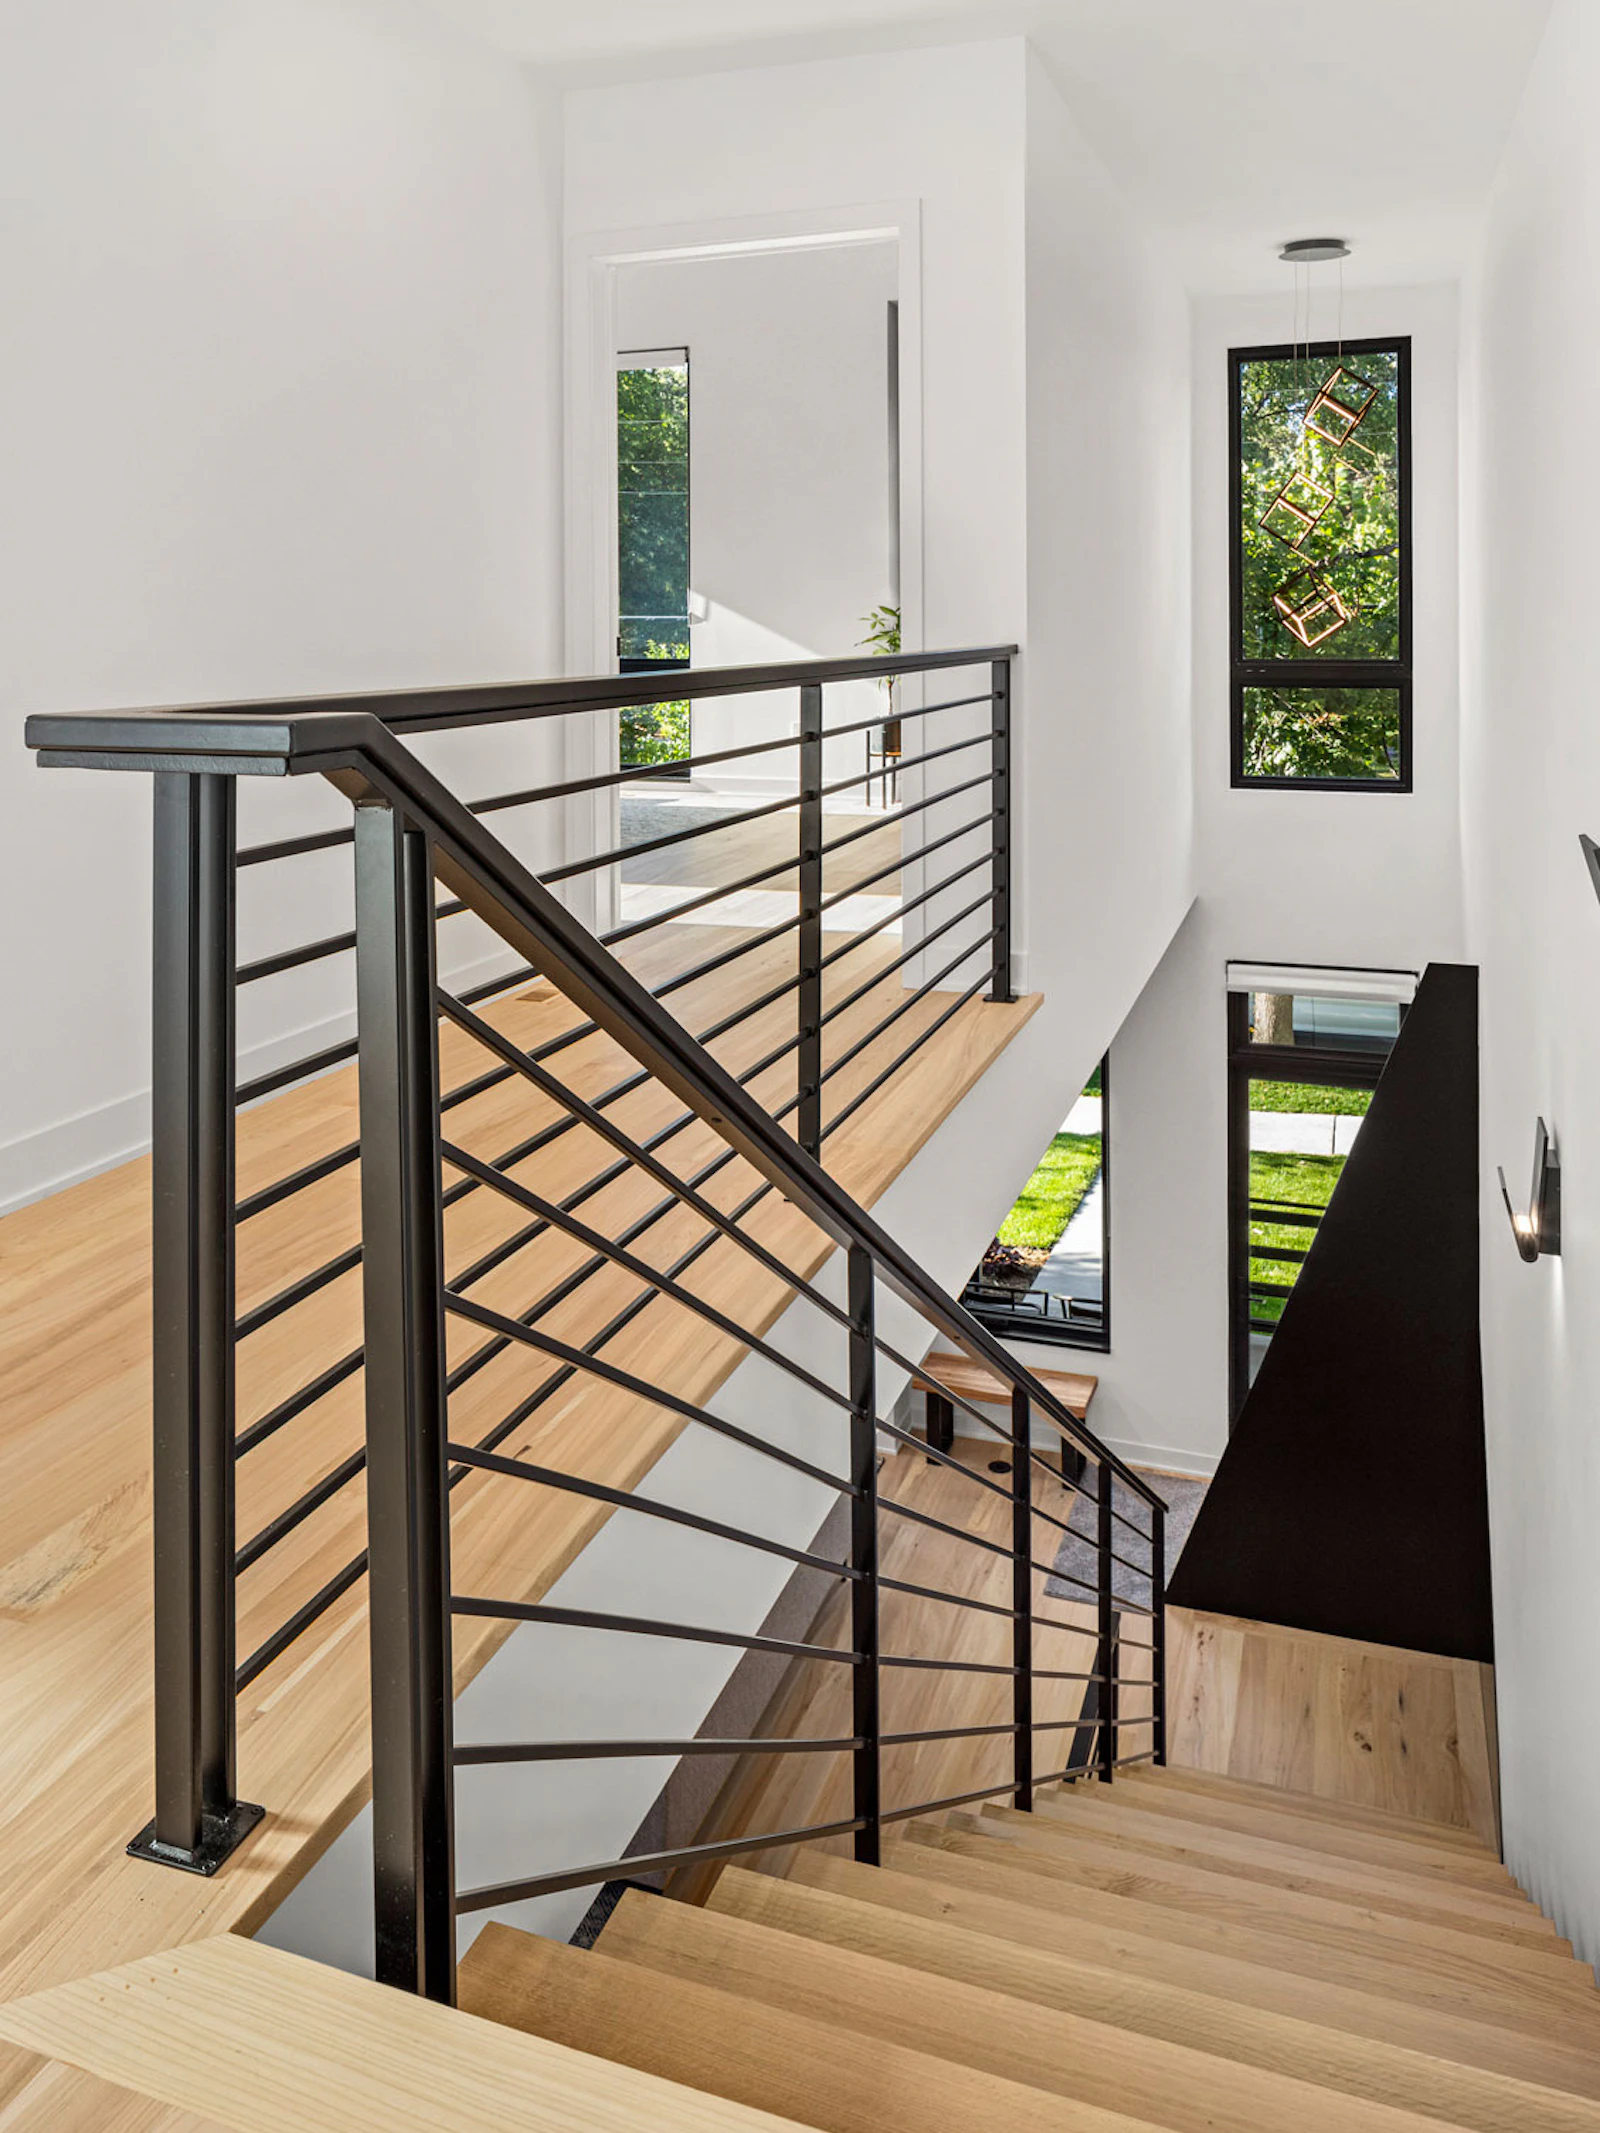 Floating steel staircase